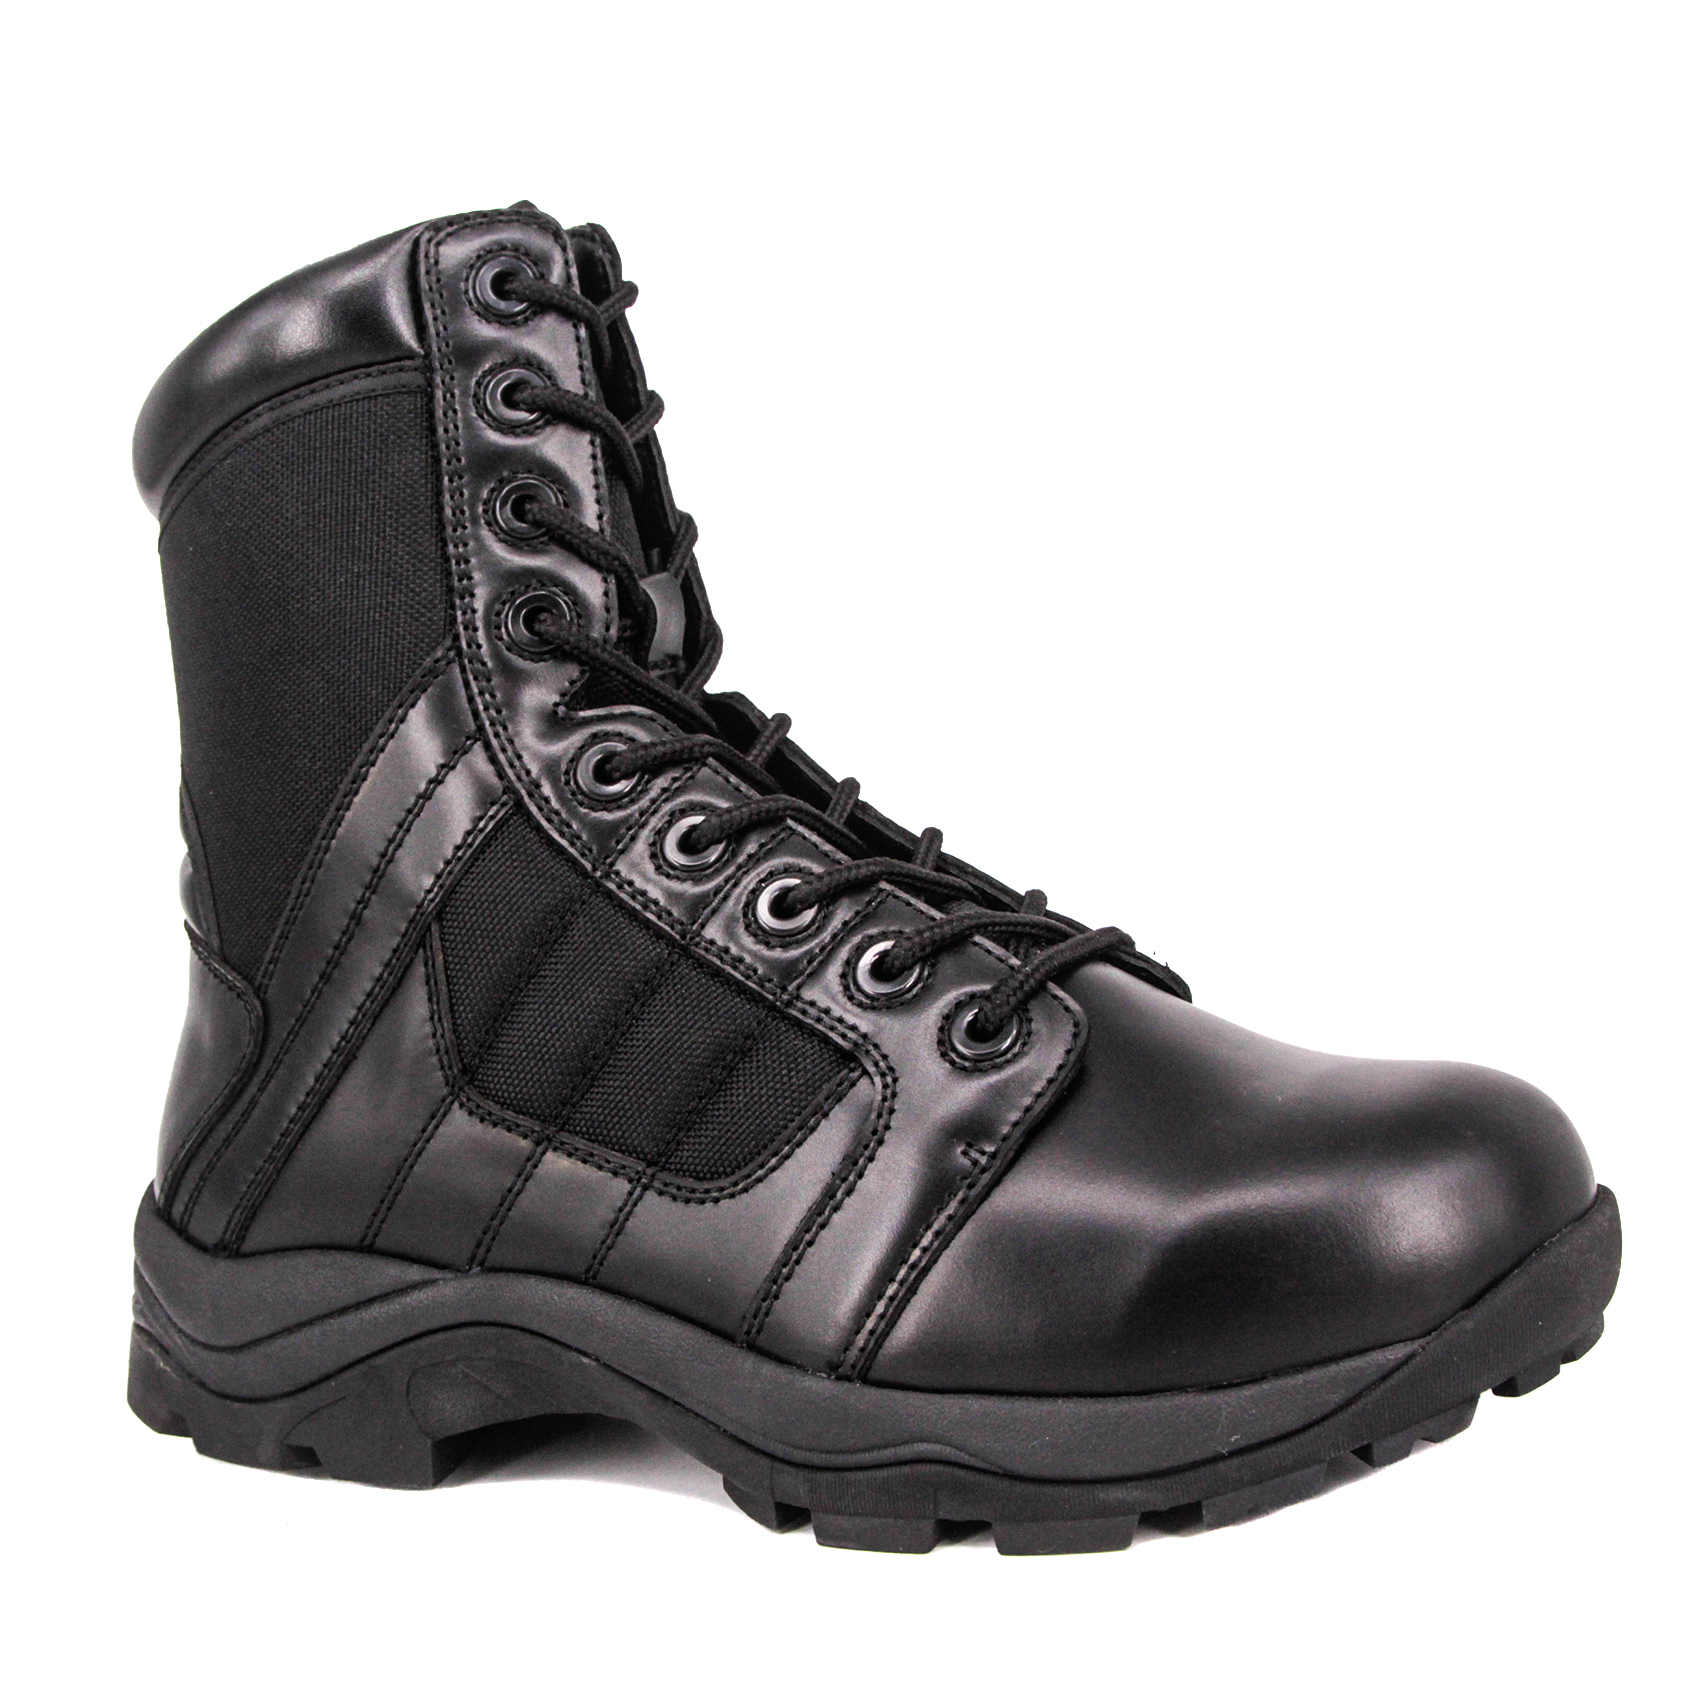 MILFORCE Genuine Leather Tactical Boots army combat boots